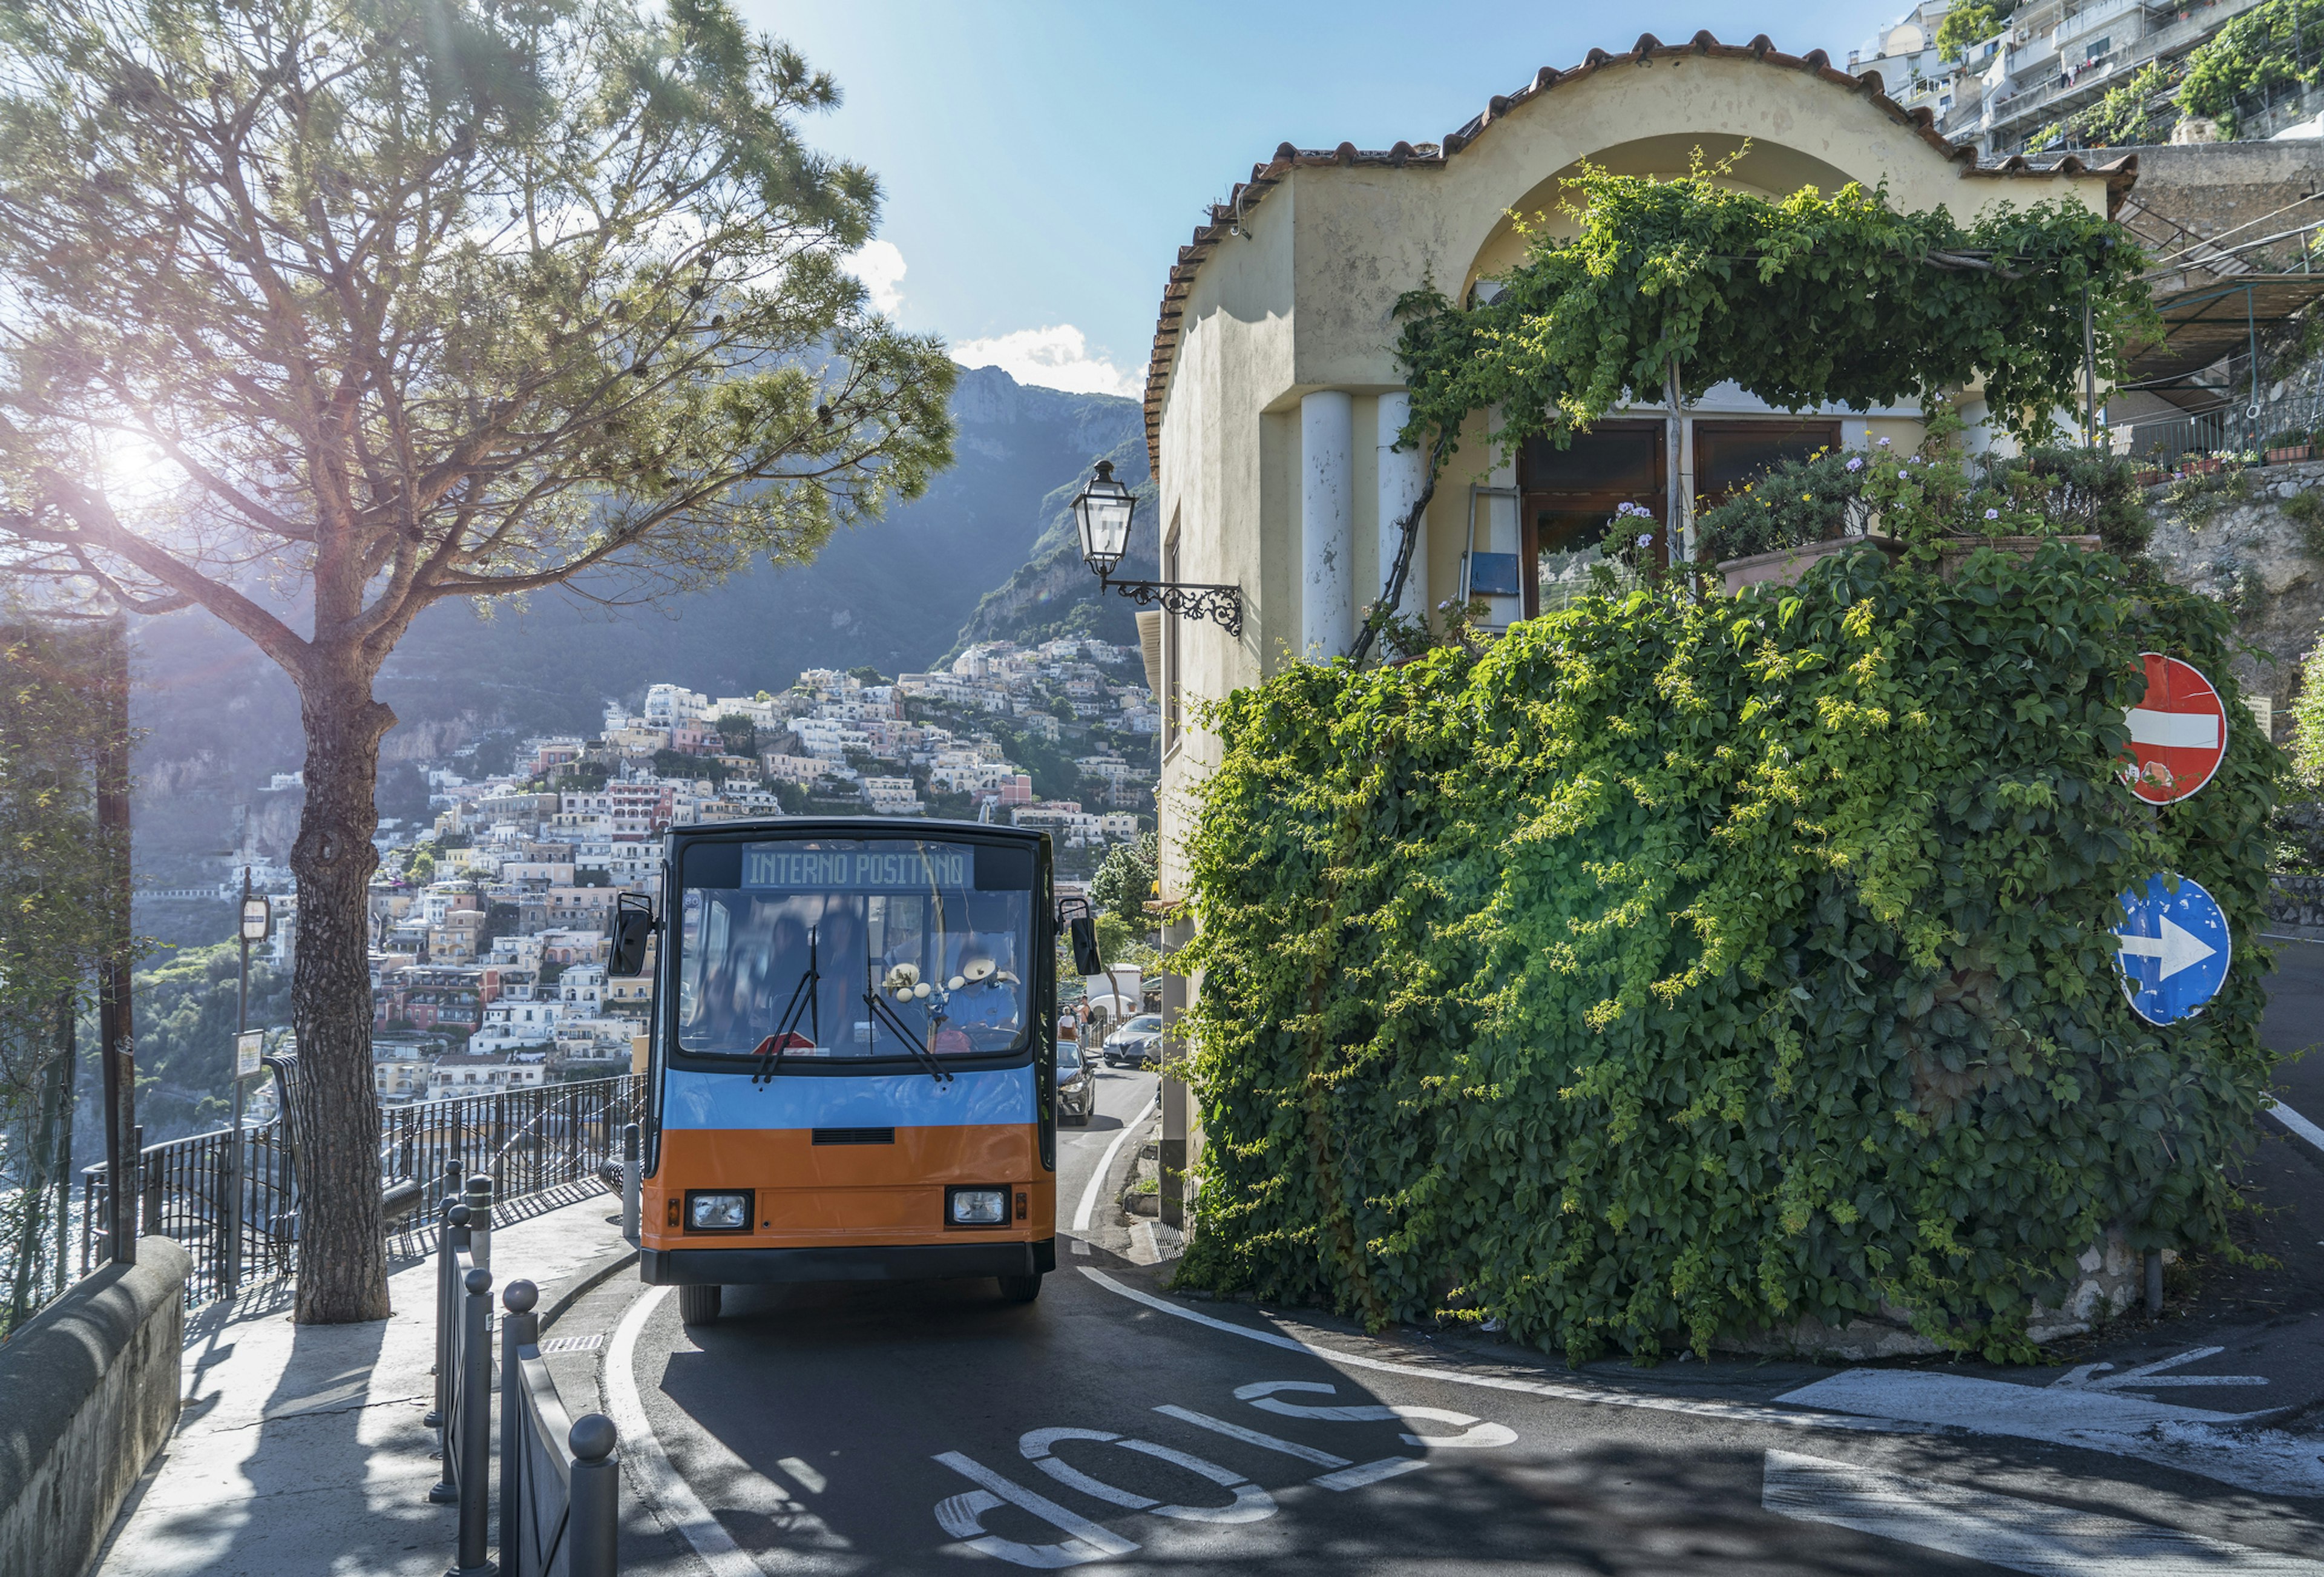 Italy. Amalfi Coast. A public bus in the narrow streets of Positano.
1053807428
away from it all, leisure